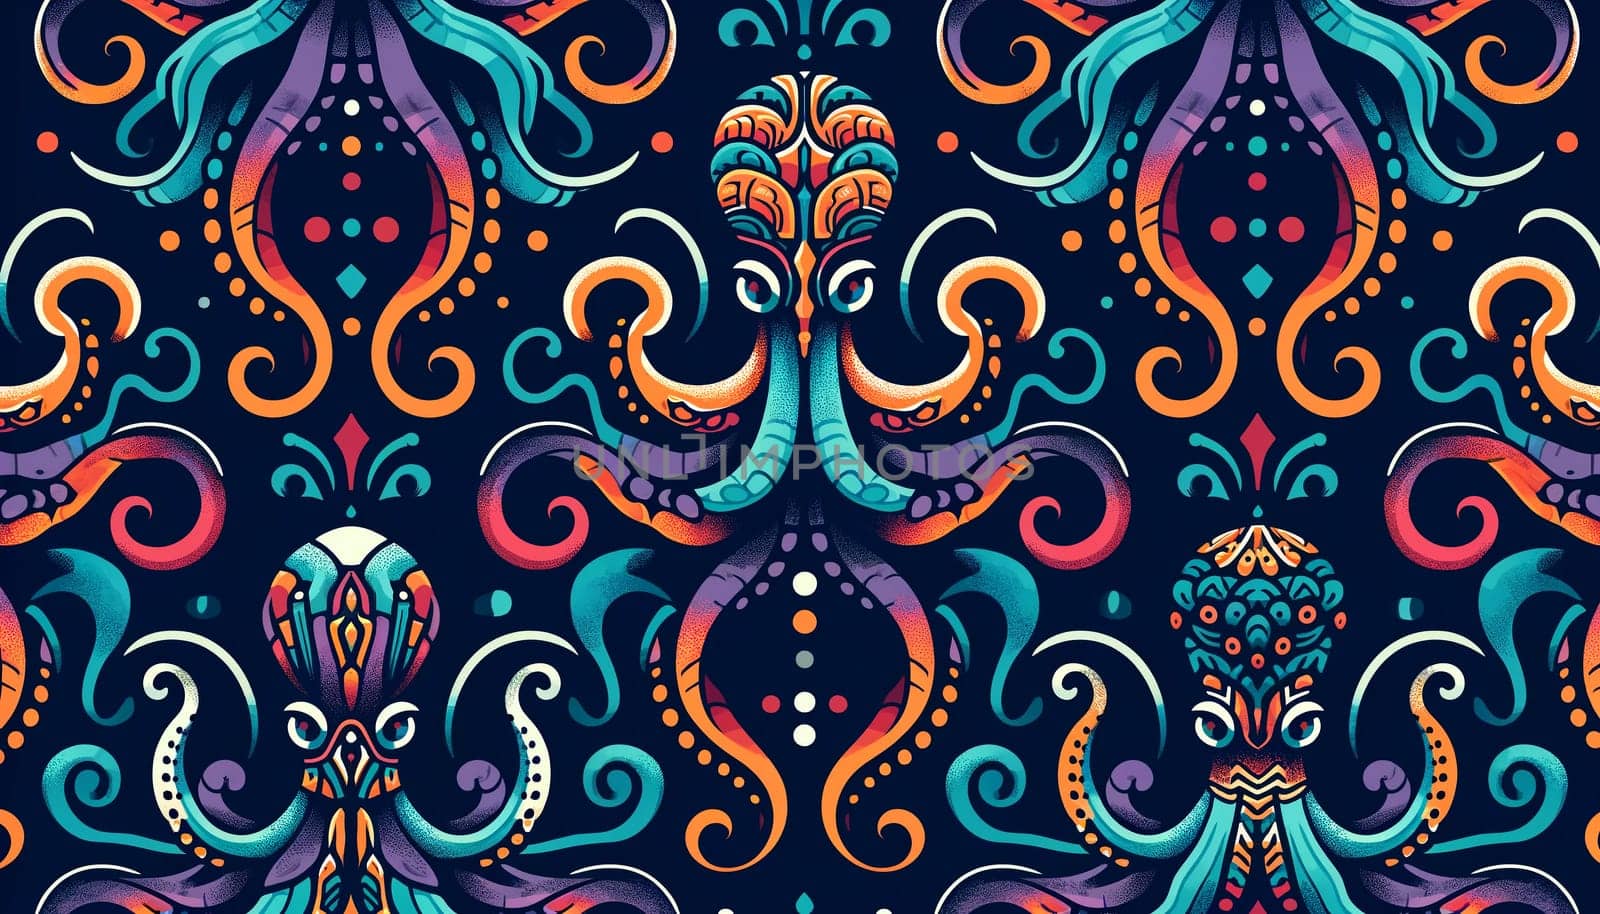 Horizontal pattern with stylized octopuses on a navy background in abstract and geometric shapes.